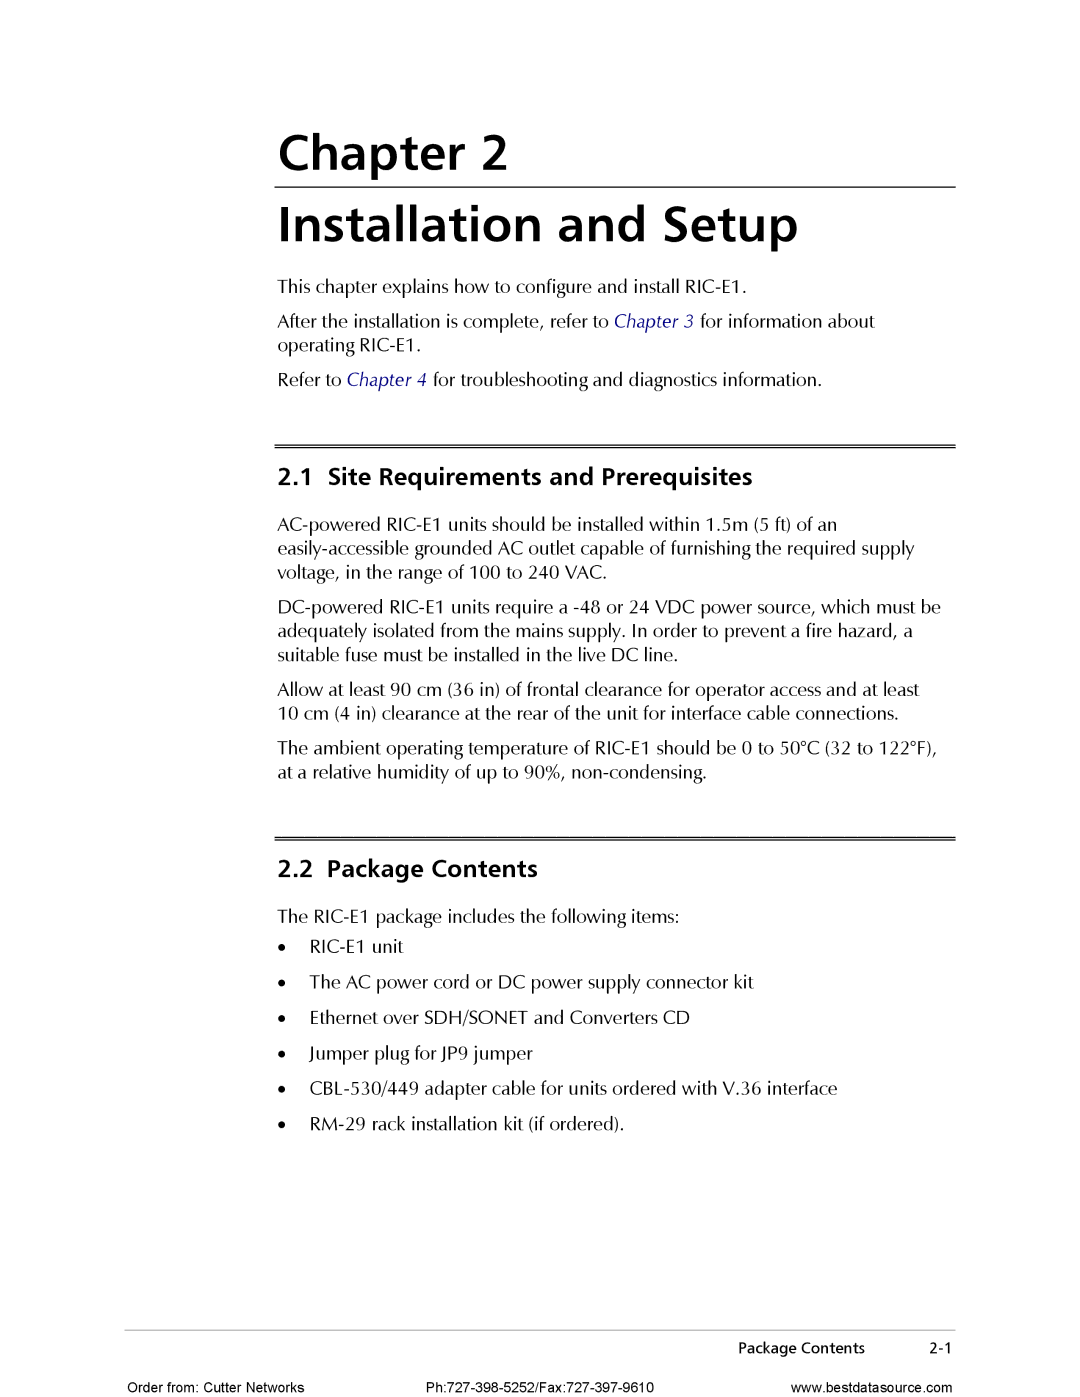 RAD Data comm RIC-E1 operation manual Chapter Installation and Setup, Site Requirements and Prerequisites, Package Contents 